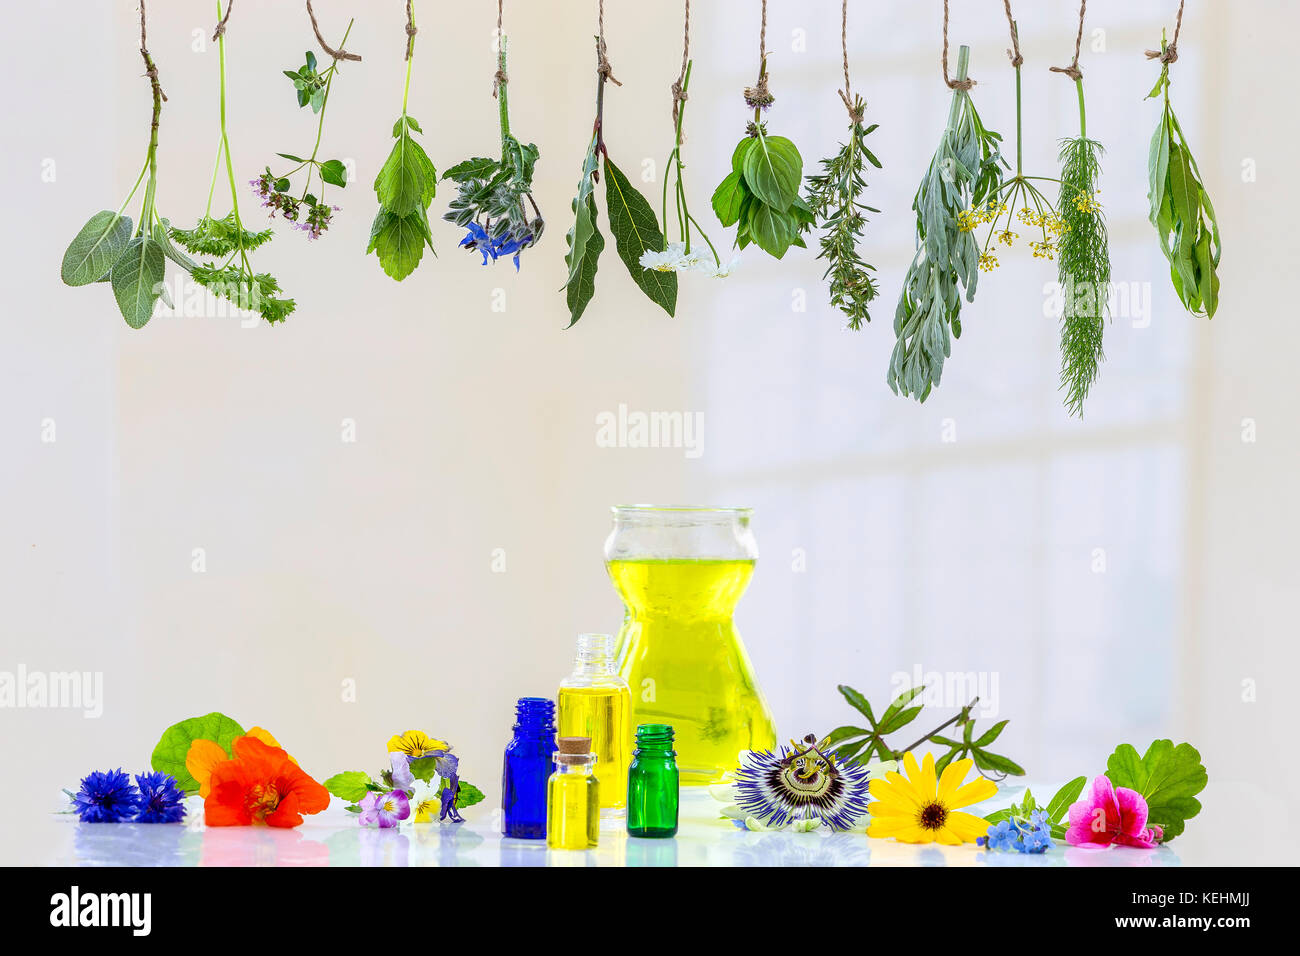 fresh herbs and essential oil in the midlle of . fresh medicinal plants hanging Preparing medicinal plants Stock Photo